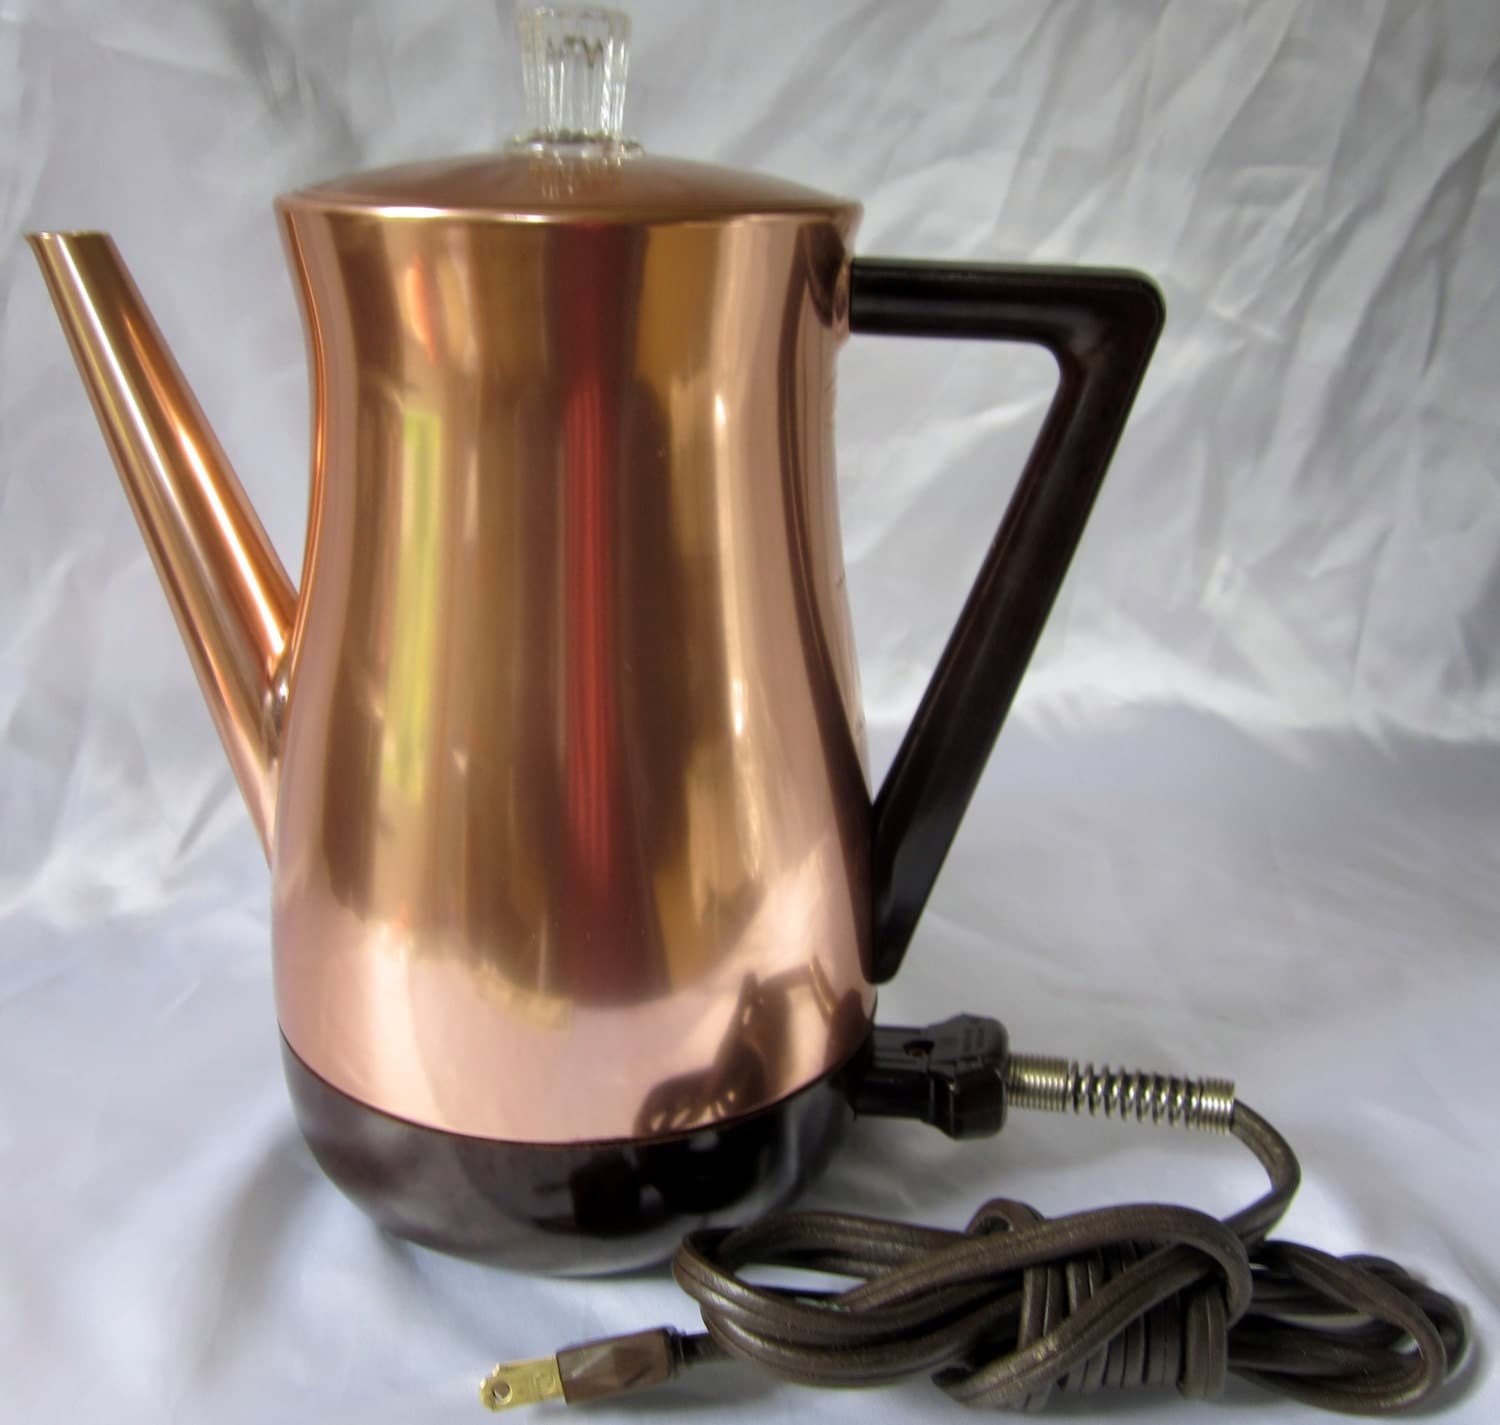 Electric Coffee Pot Percolator West Bend Copper New Flavo By Ddb7